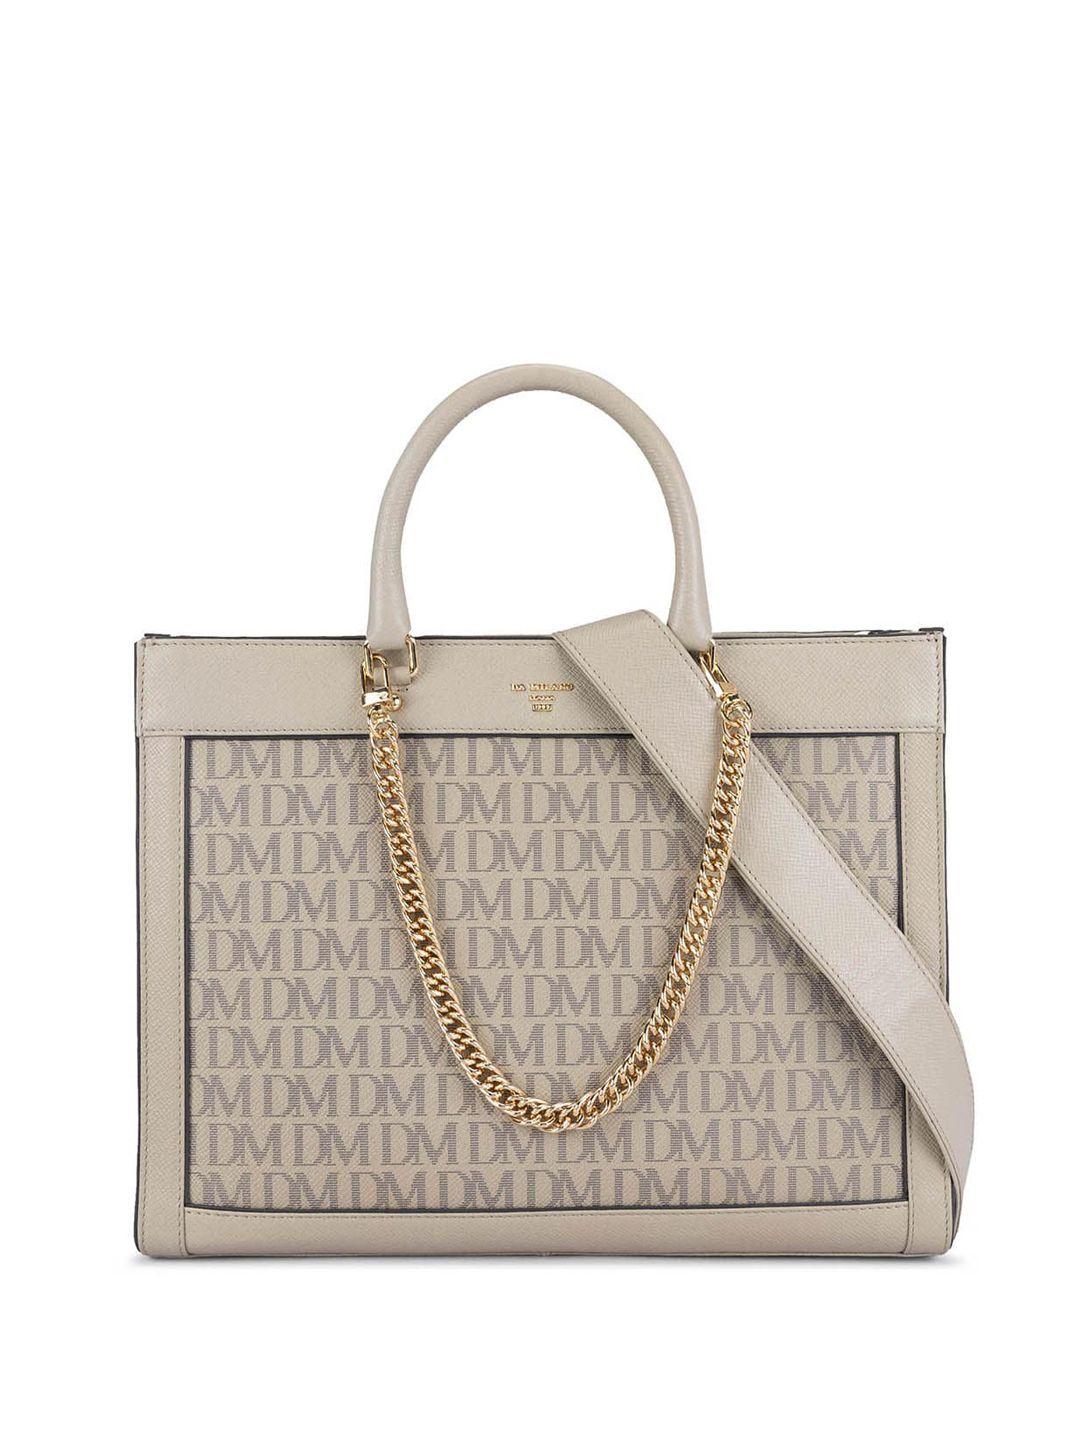 da milano typography printed leather structured handheld bag